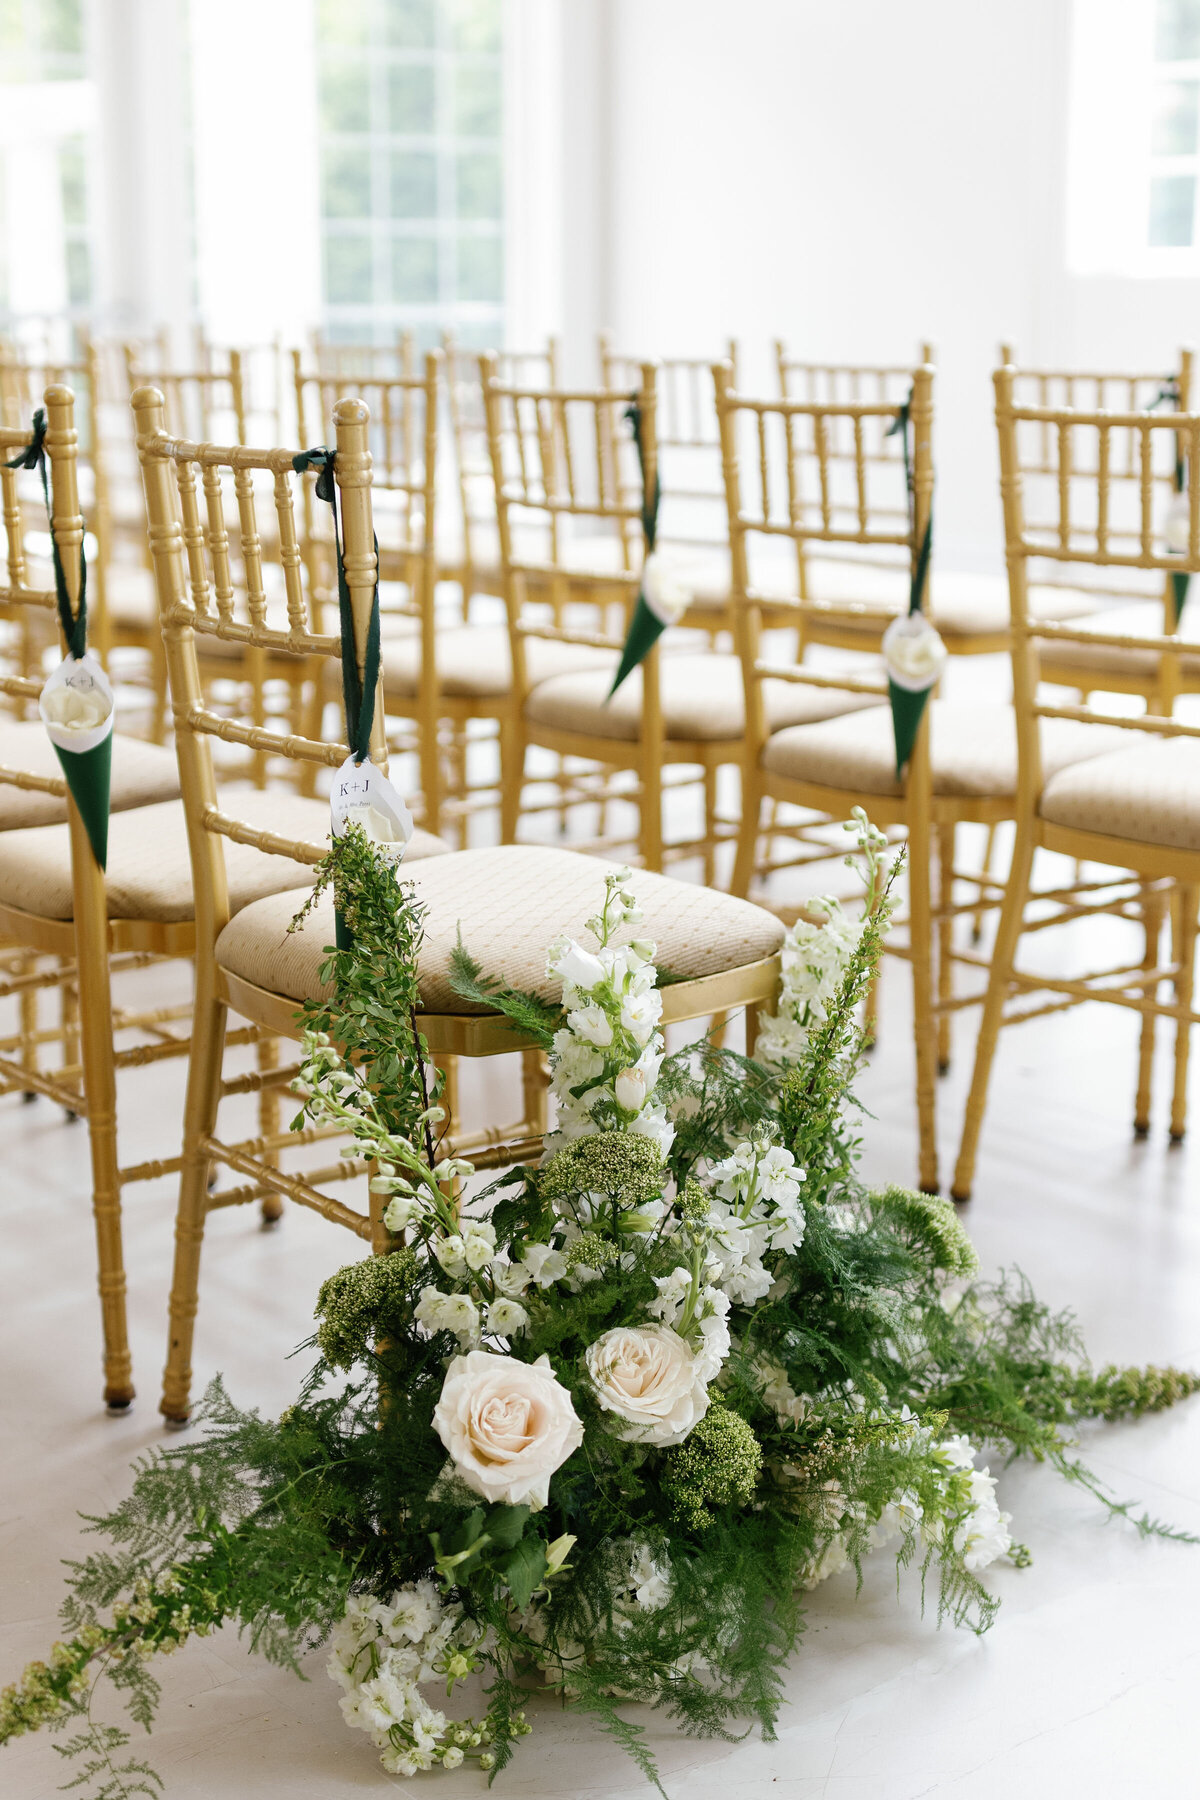 chair-decor-wedding-white-and-green-wedding-ceremony-flowers